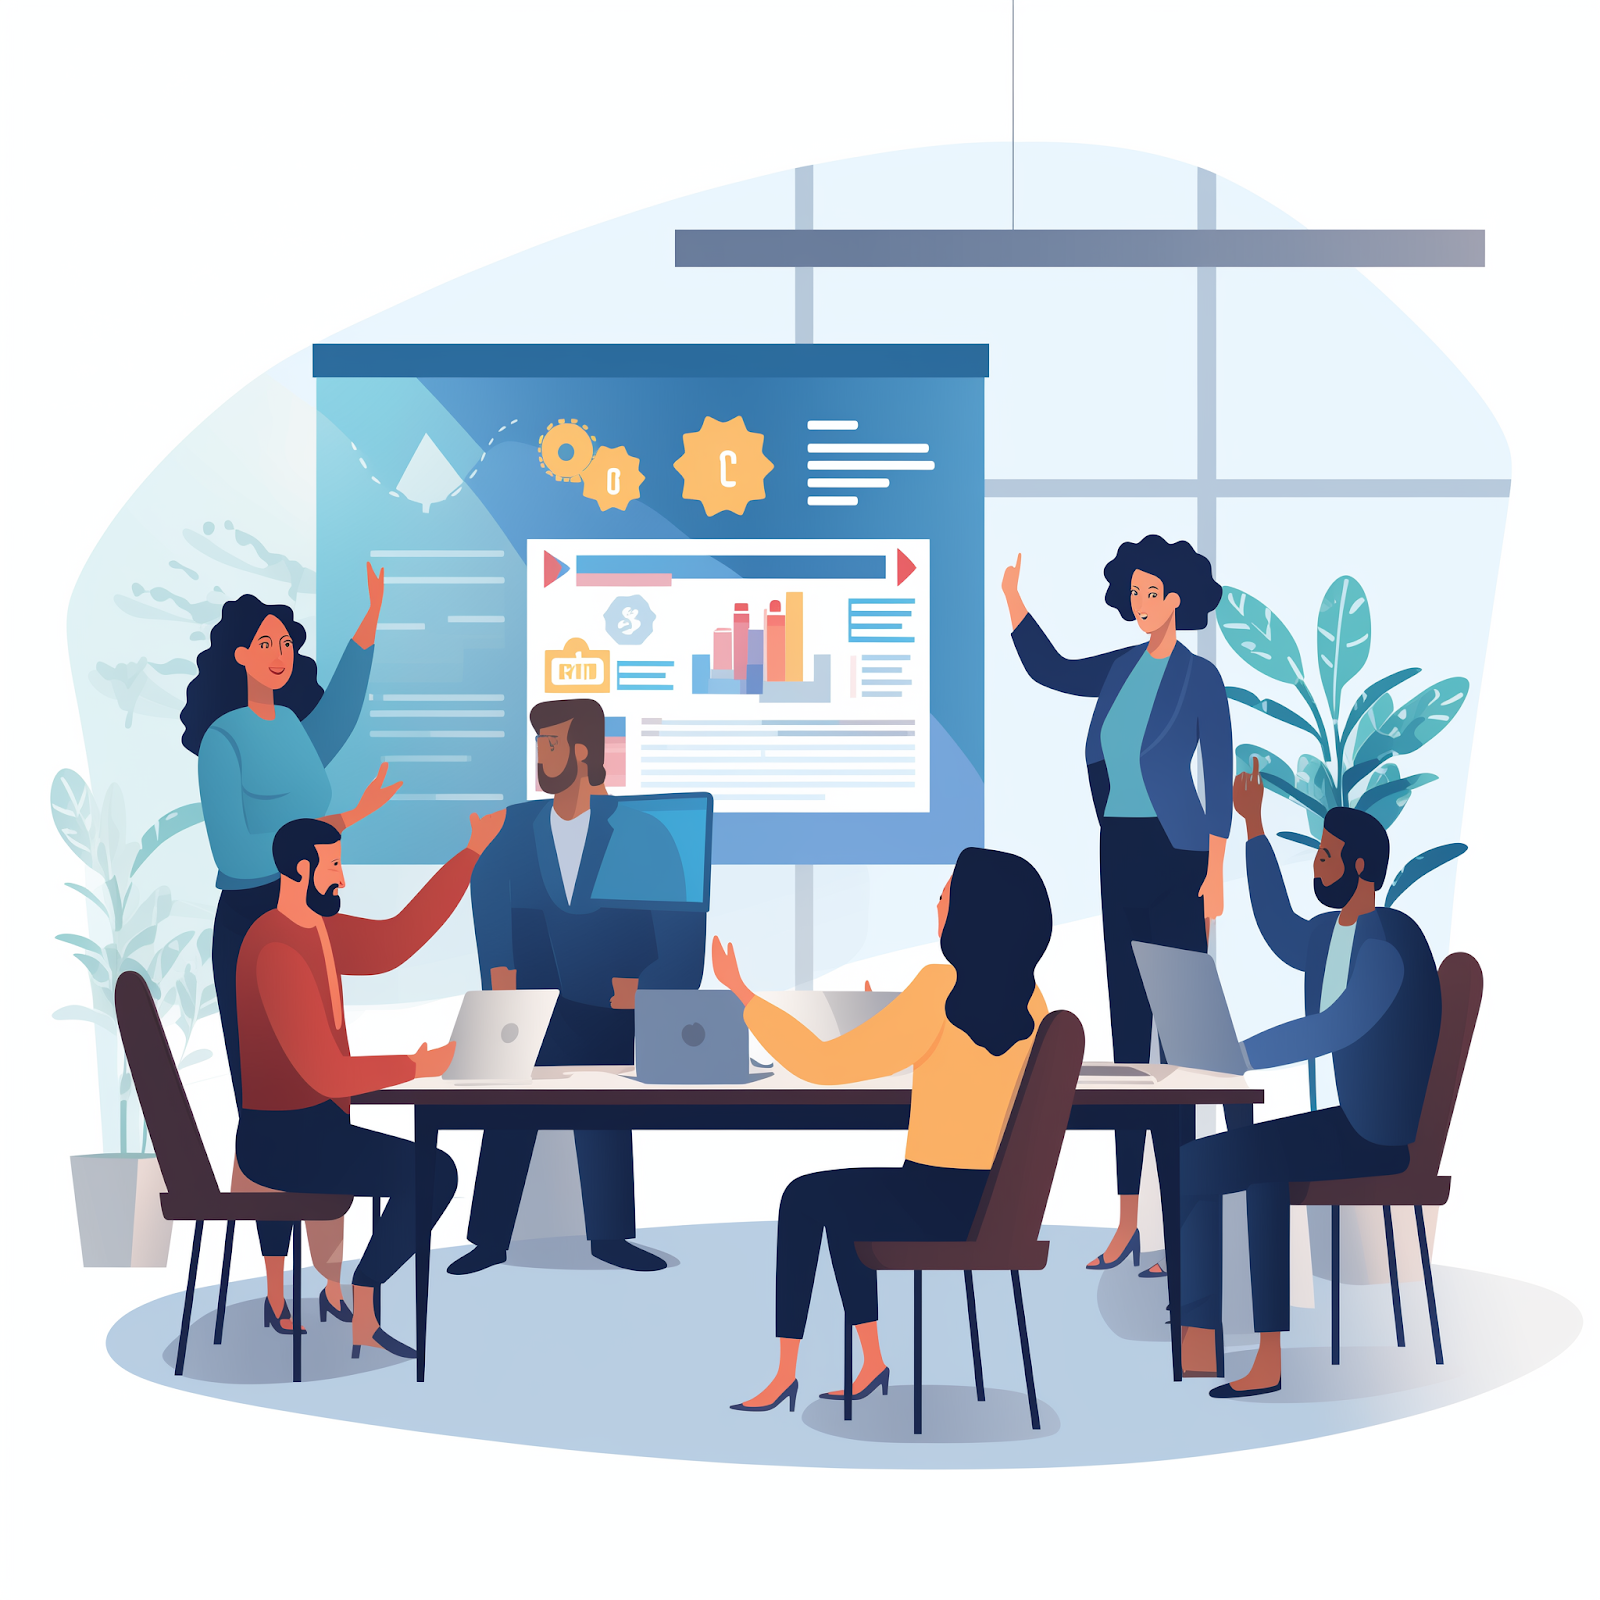 A colorful meeting room scene with a diverse group of professionals collaborating over a hybrid work strategy, emphasizing teamwork and innovation.